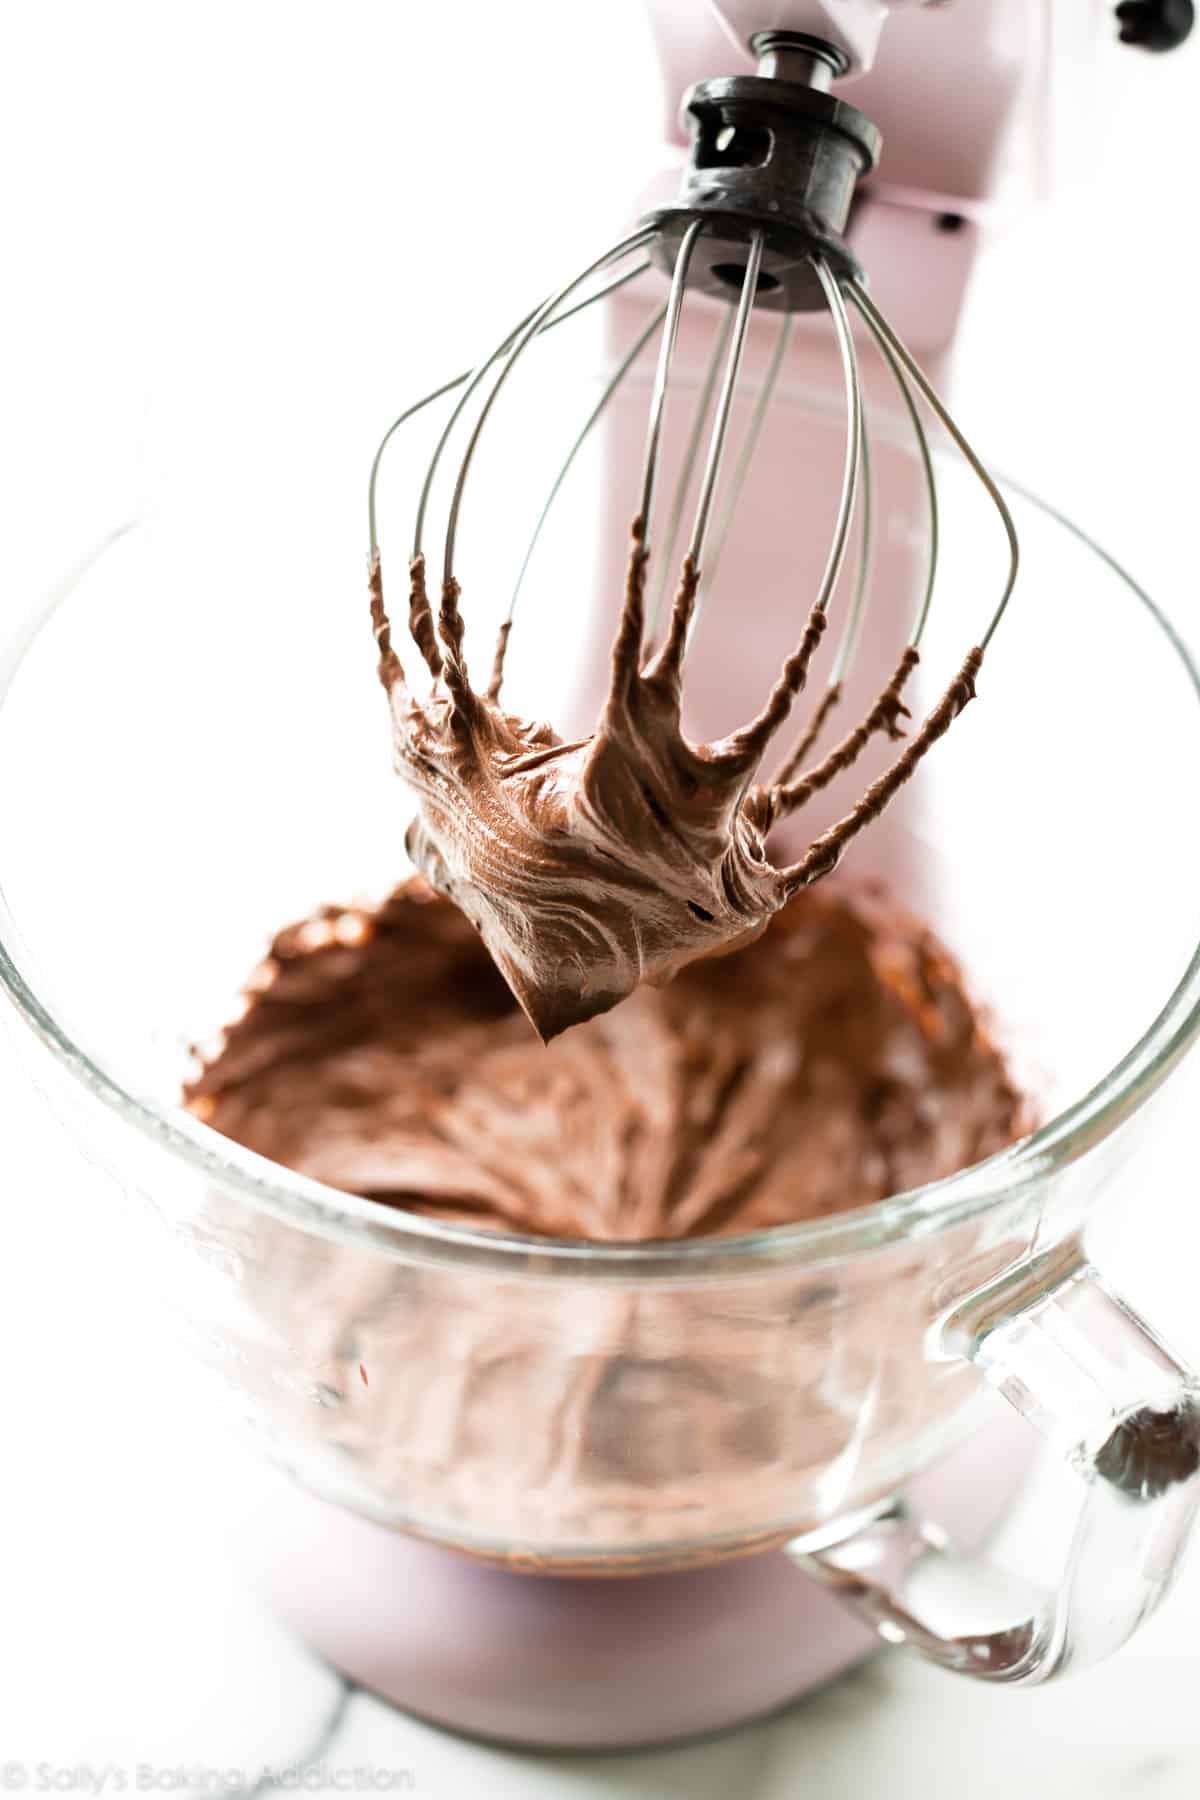 whipped chocolate ganache in a stand mixer bowl with whisk attachment